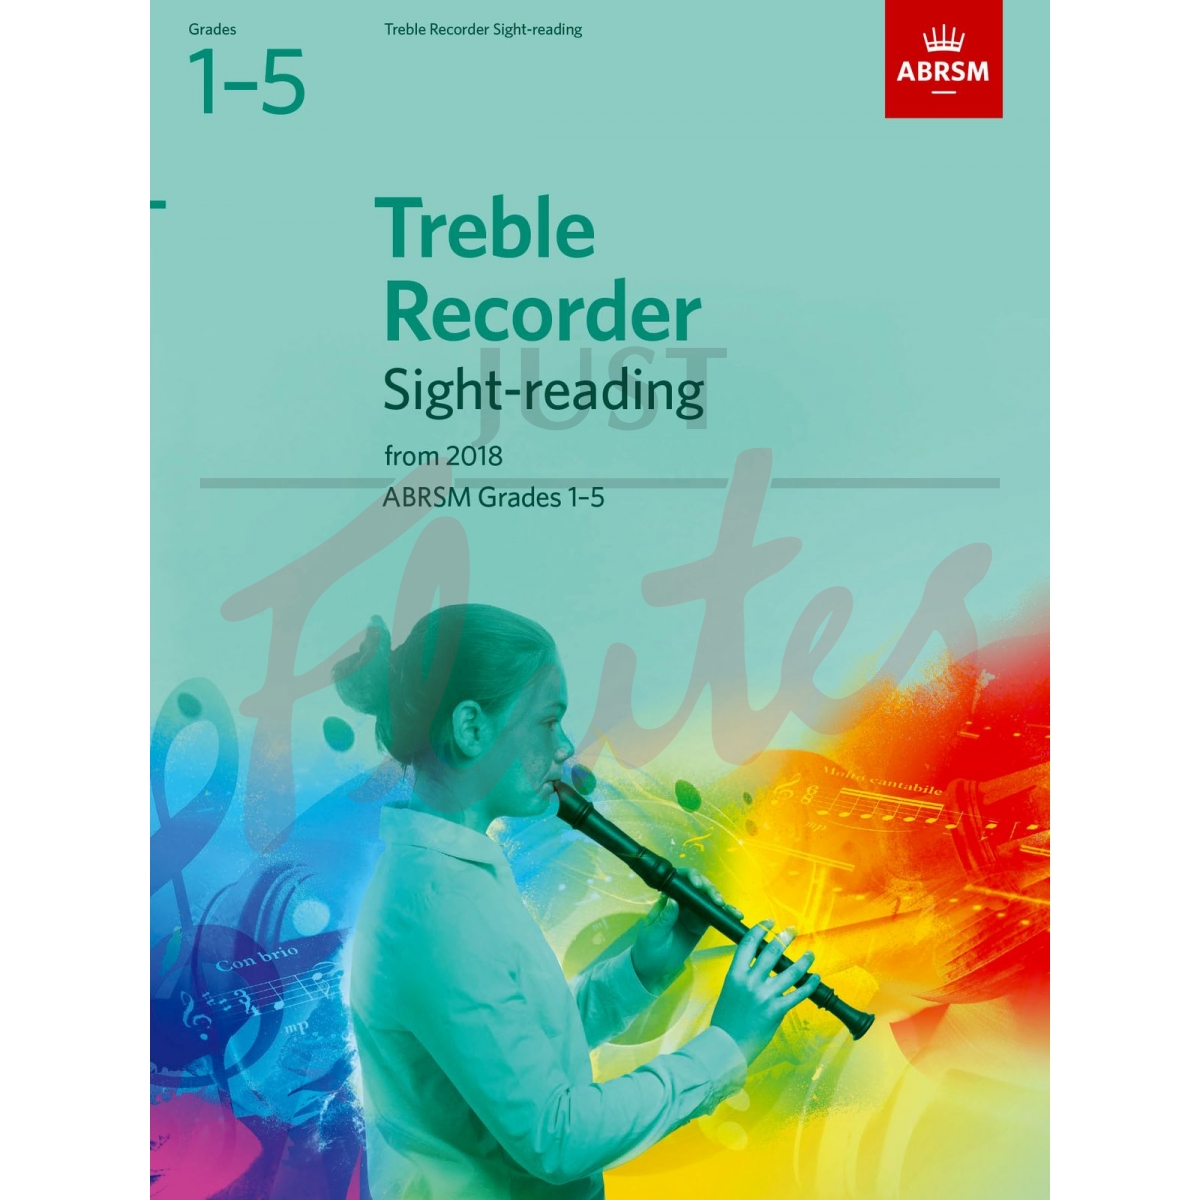 Sight-Reading Tests Grades 1-5 (from 2018) [Treble Recorder]